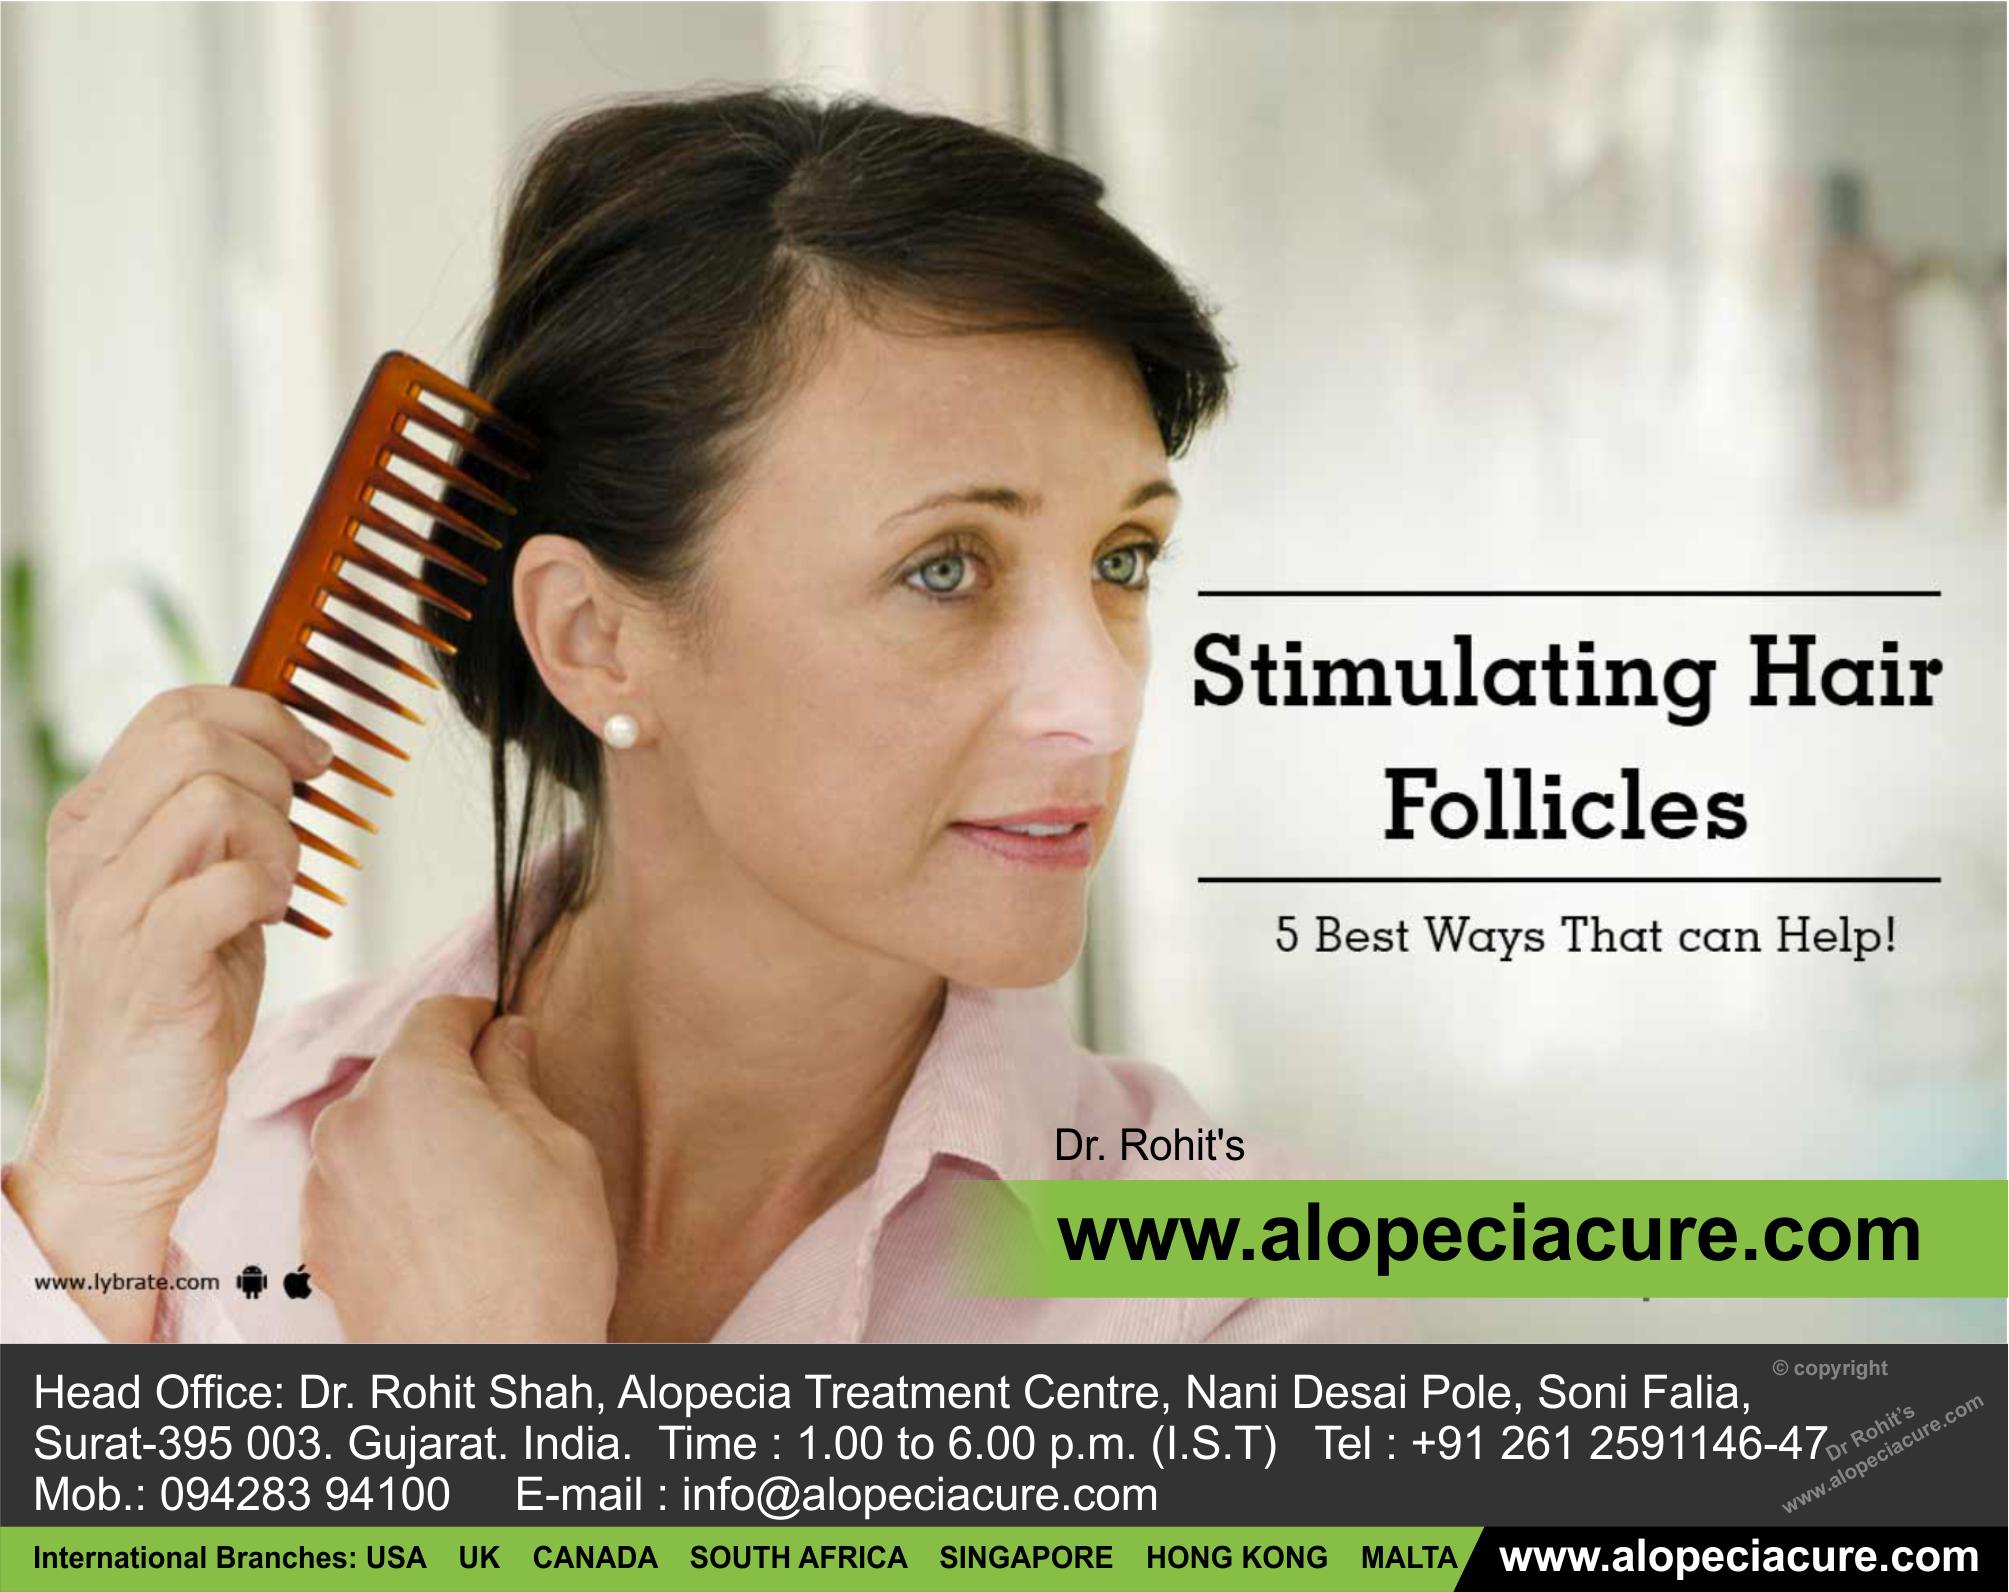 Stimulating Hair Follicles - 5 Best Ways that can help!